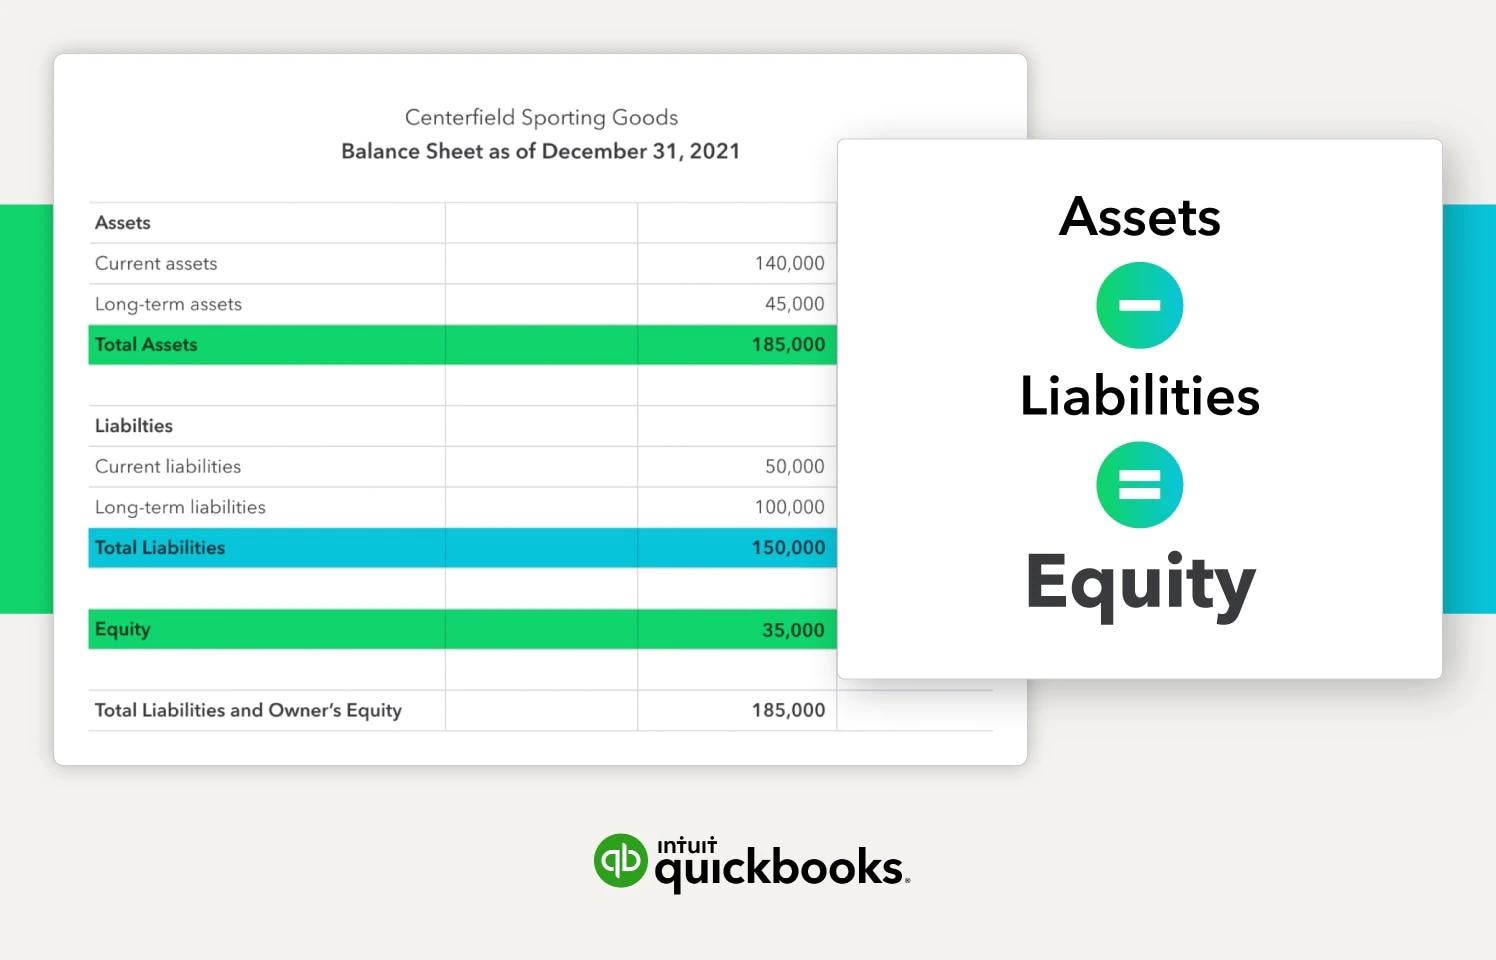 A balance sheet in the background and a formula in the foreground that shows Assets - liabilities = equity